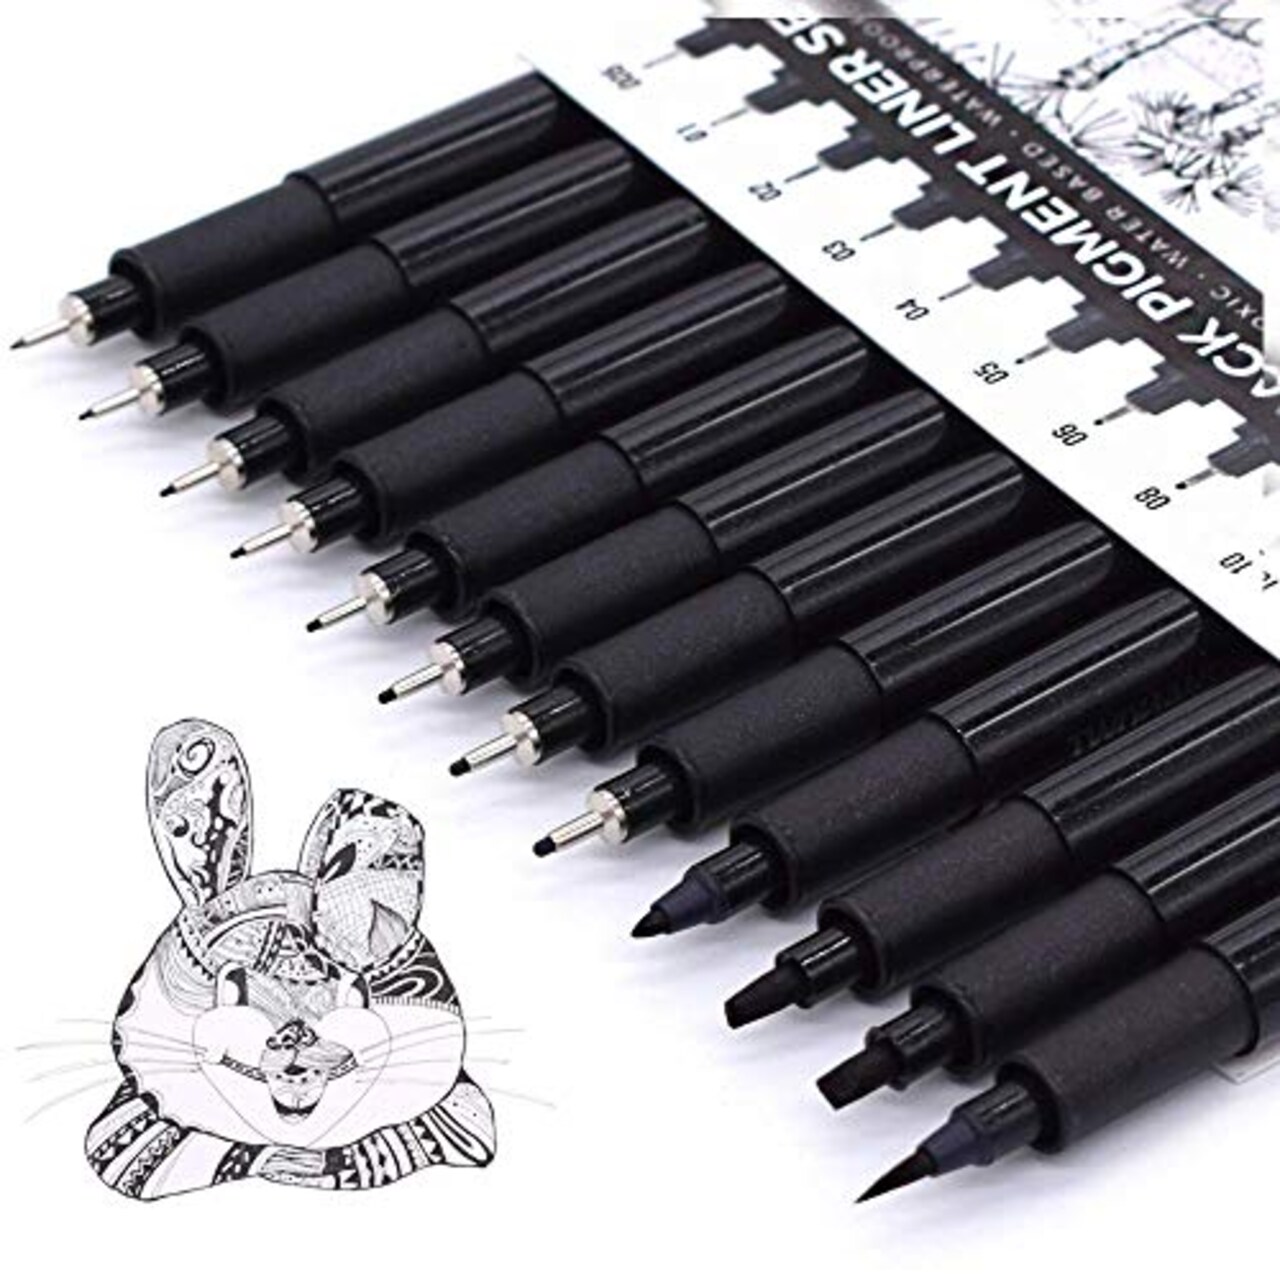 TWOHANDS Micro Pigment Pens, Art Fineliner Ink Technical Drawing Pen, Fine  Point, Black, Waterproof, for Watercolor, Sketching, Anime, Manga,  Scrapbooking 20413, Set of 12